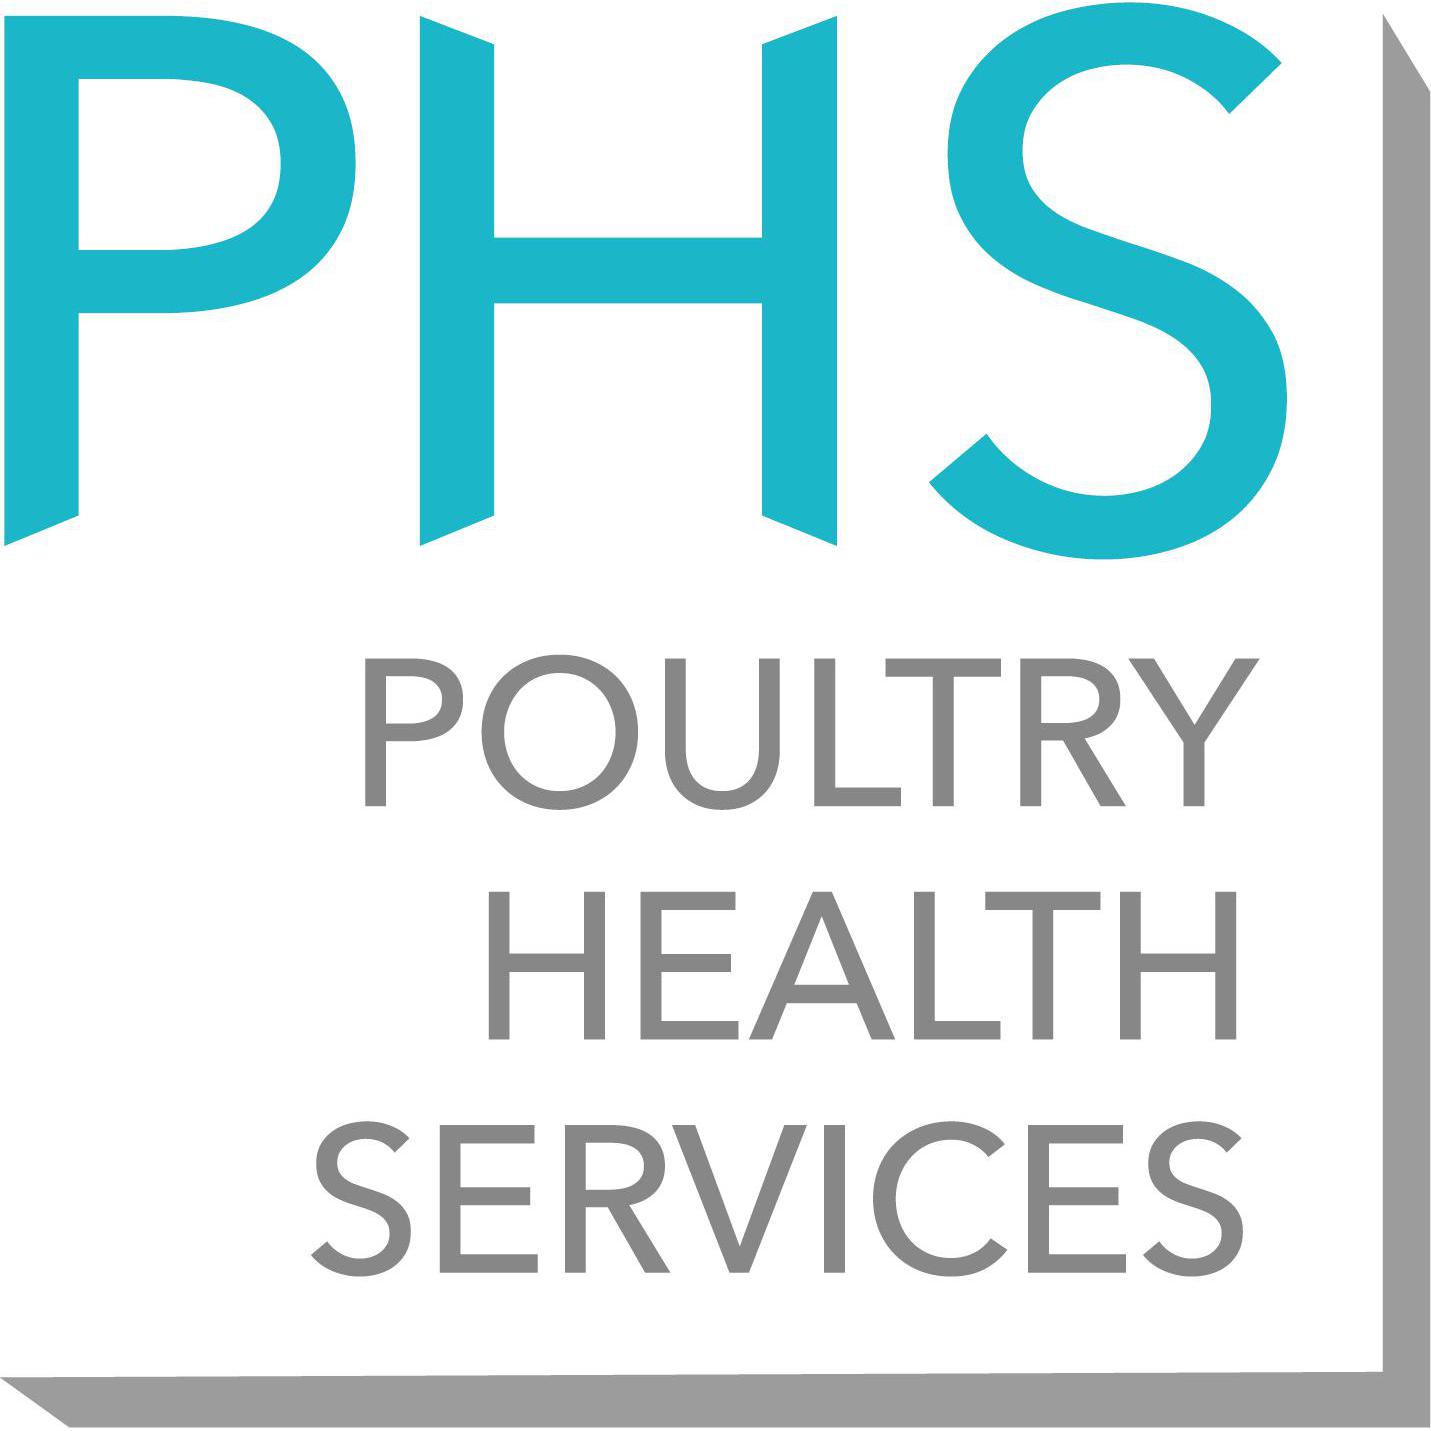 Poultry Health Services (at Wood Vets) - Gloucester, Gloucestershire GL2 4NB - 01981 241320 | ShowMeLocal.com